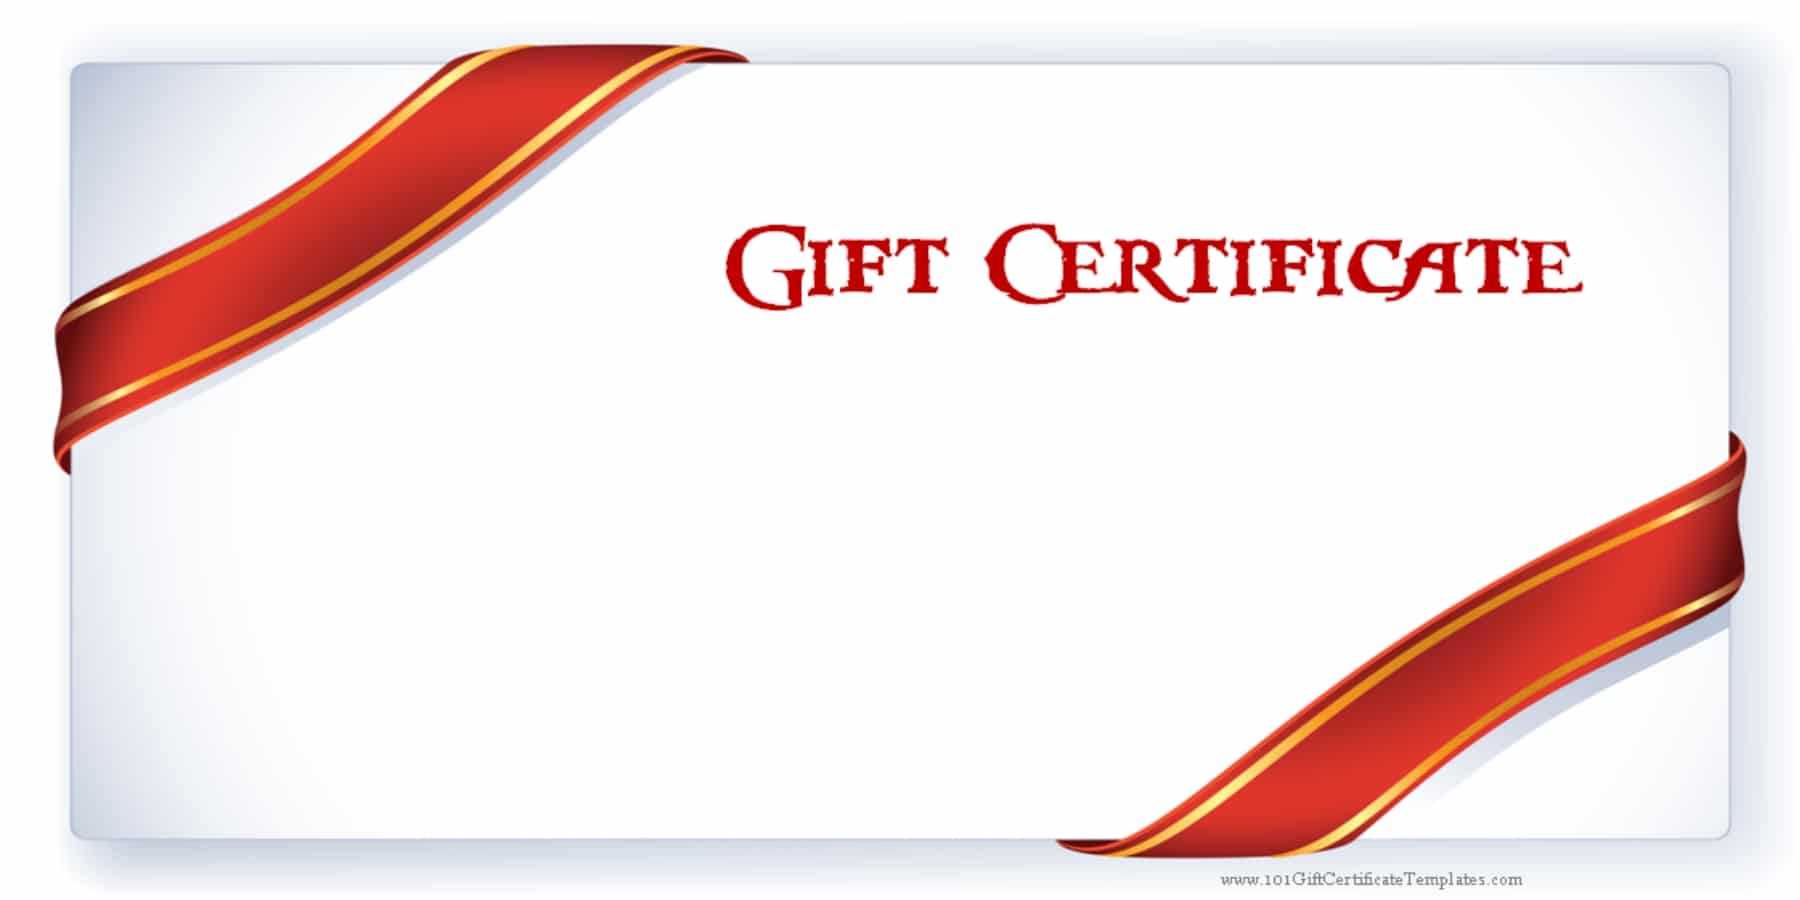 Printable Gift Certificate Templates Intended For Present Certificate Templates